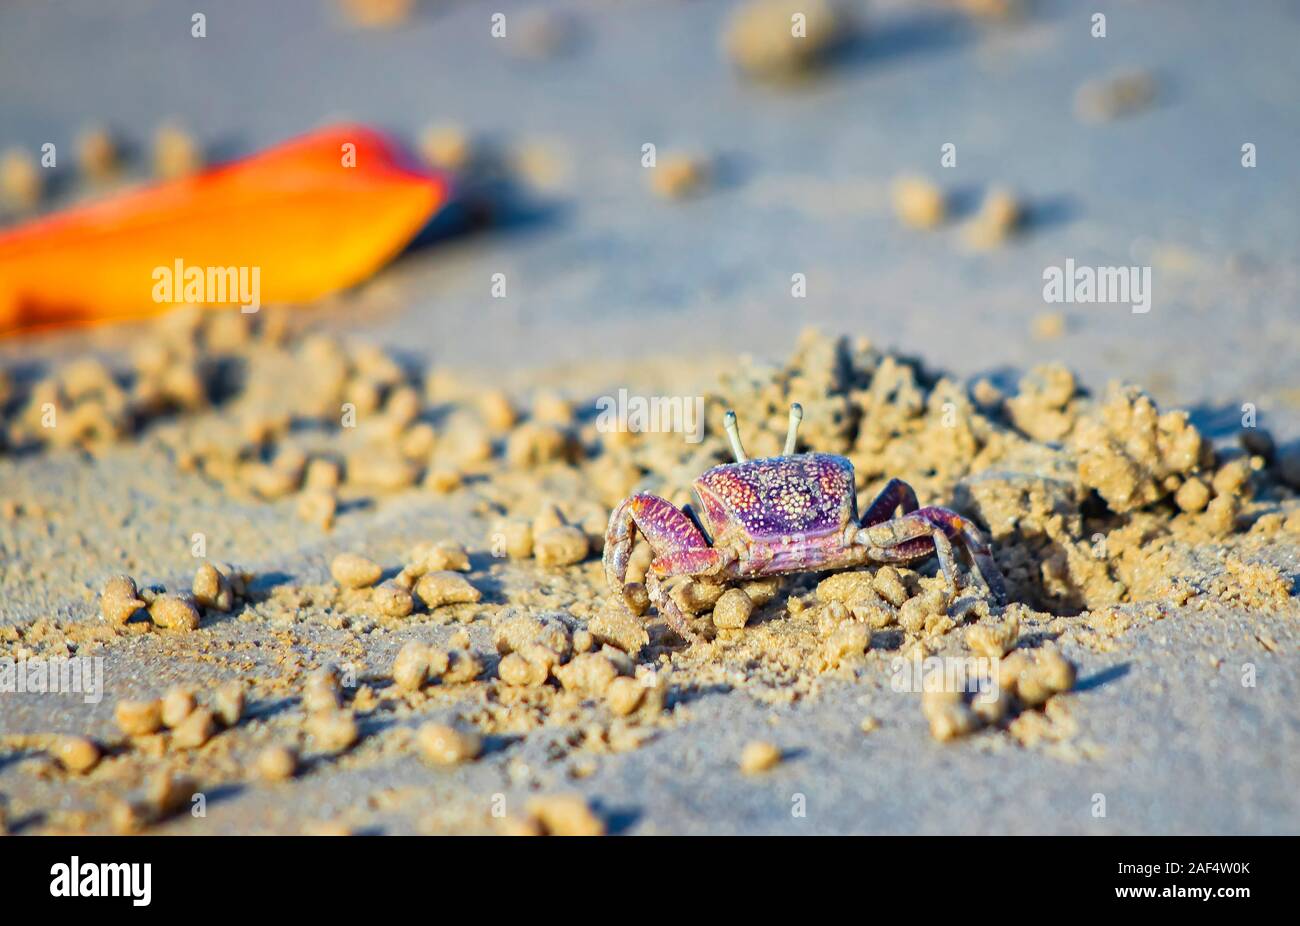 A small red crab on a sandy beach in a sea lagoon in Africa, Senegal. It is a wildlife photo in nature. Stock Photo